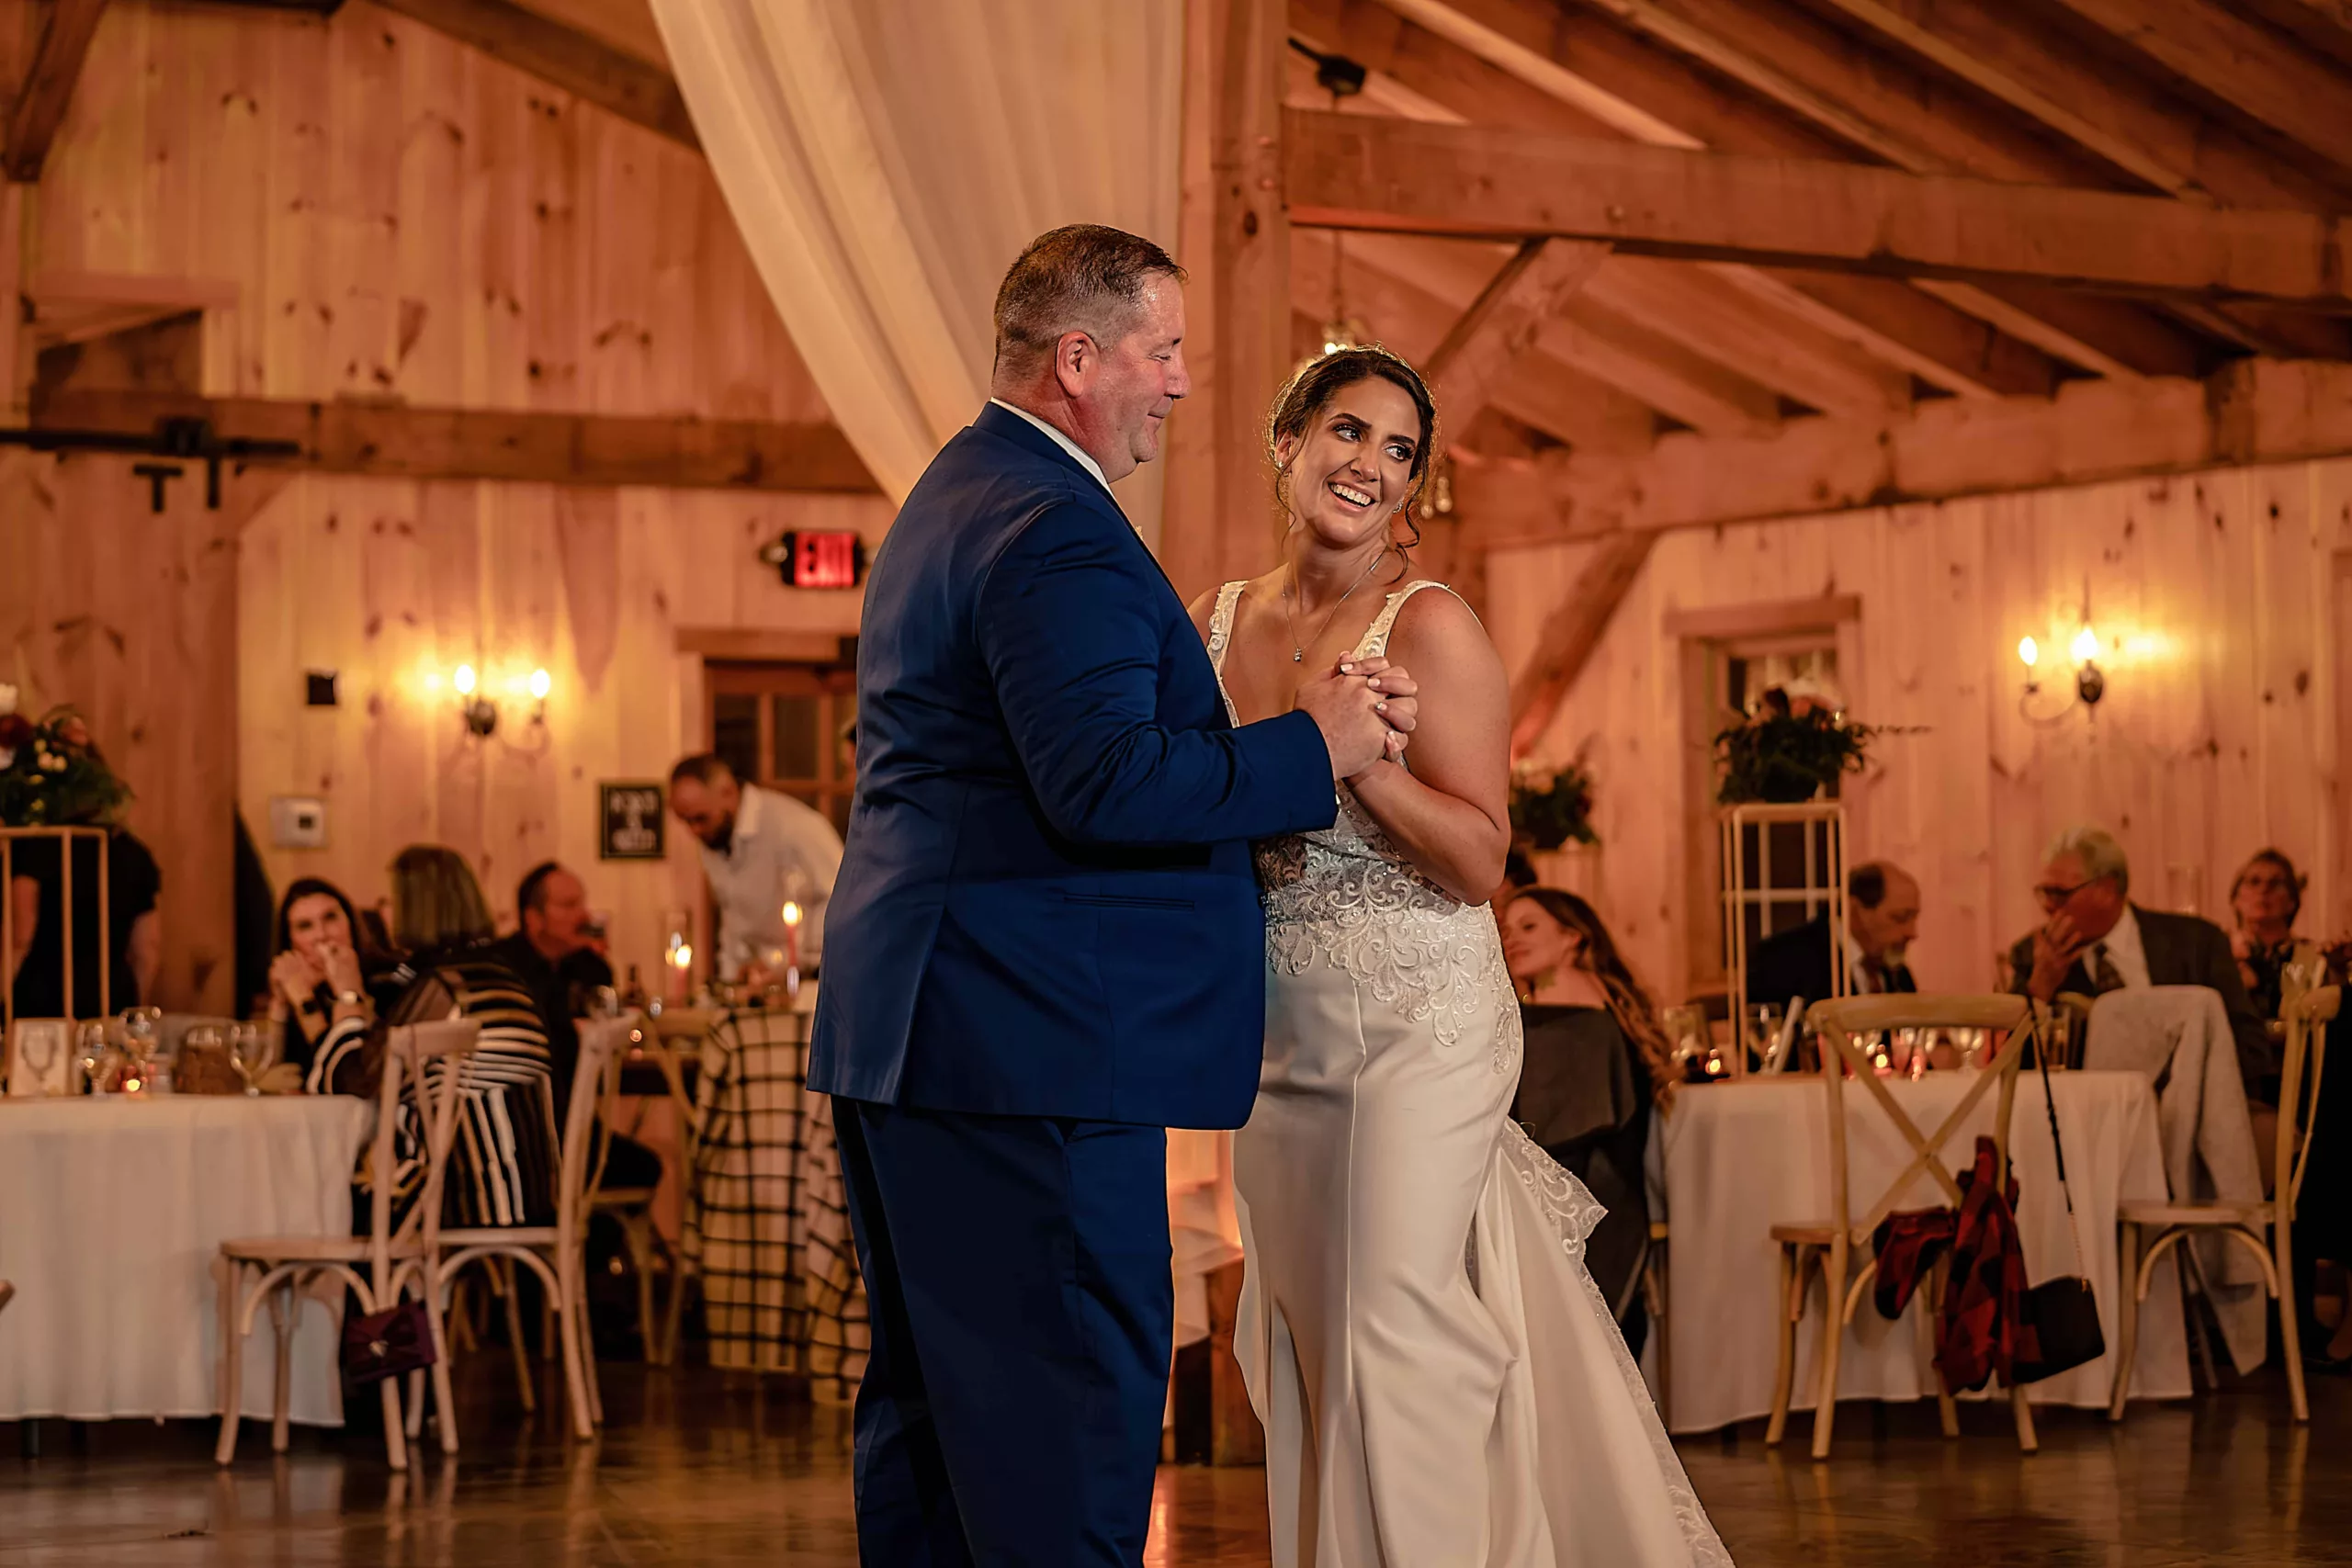 Bride and father sharing a heartfelt first dance at a connecticut barn wedding venue